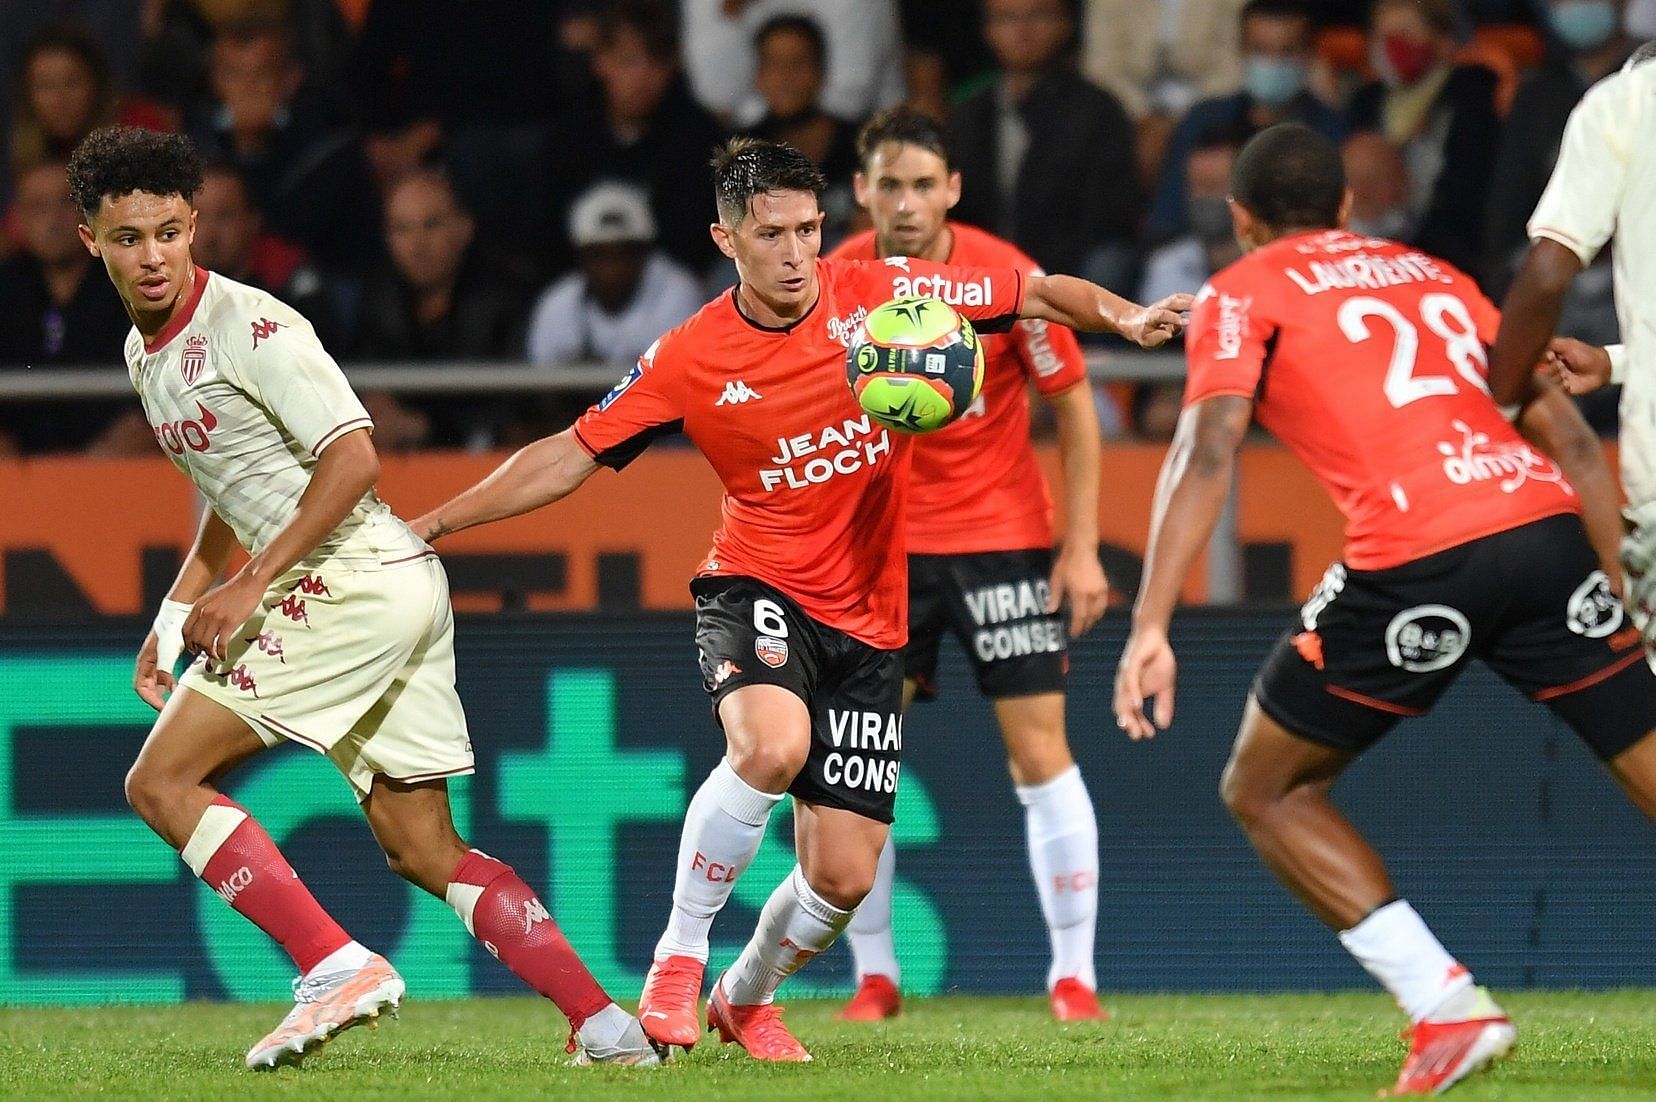 Lorient host Strasbourg in the Ligue1 on Sunday